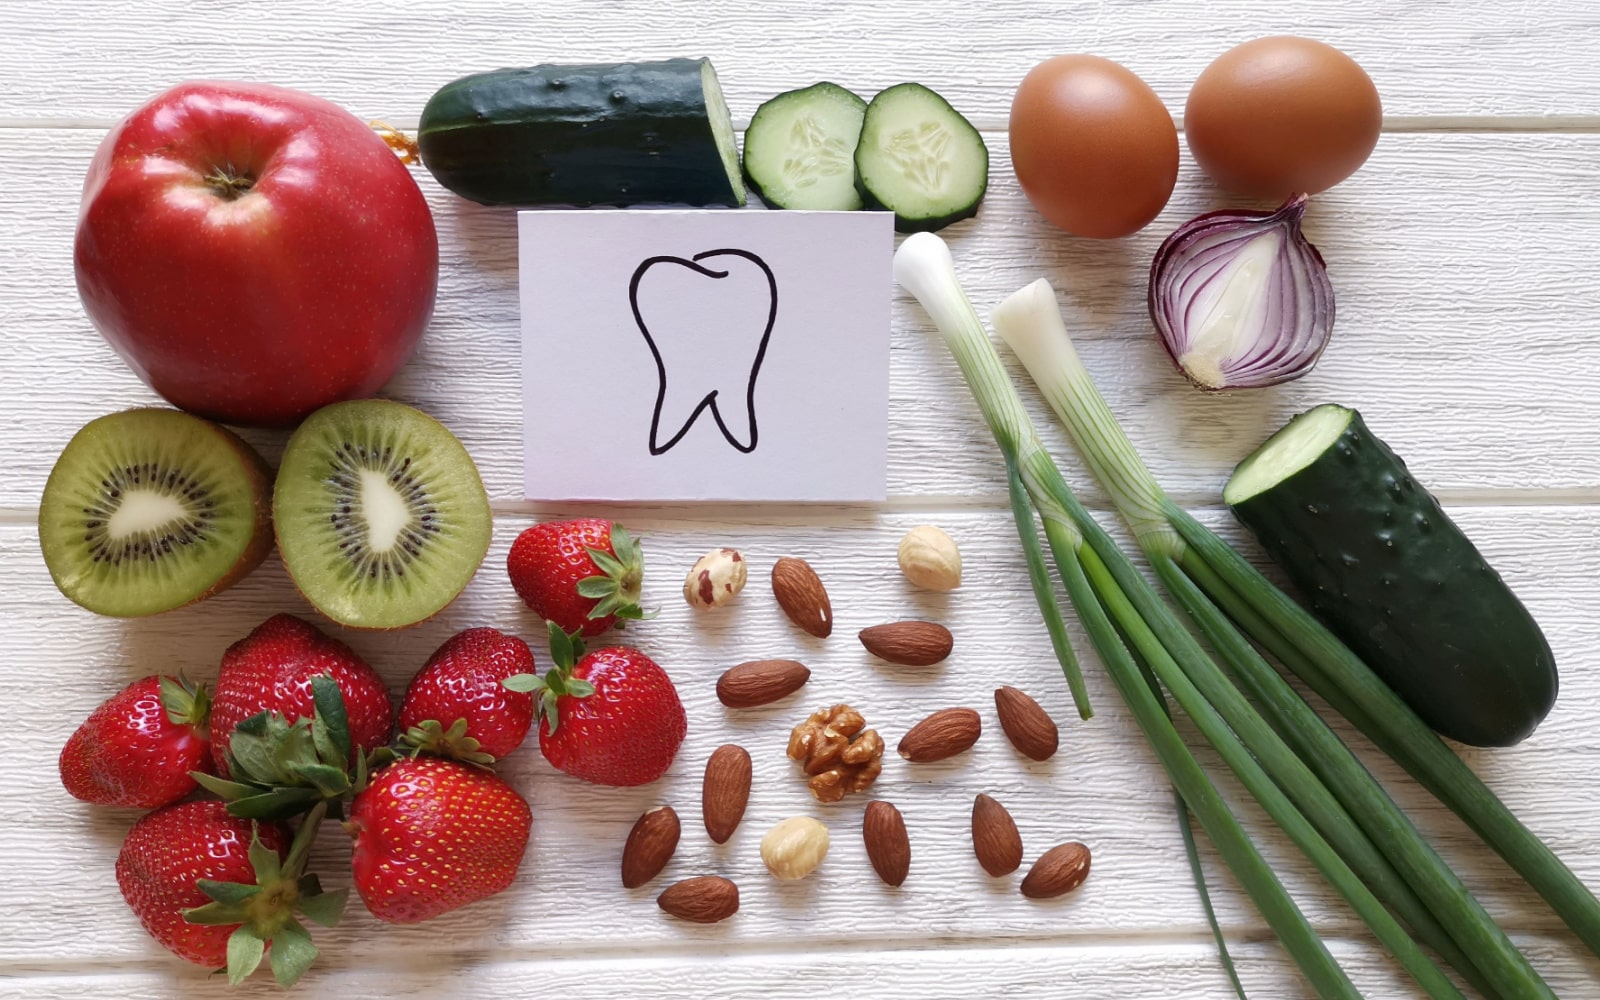 Array of Fluoride Rich Foods with a Tooth Drawing In the Center